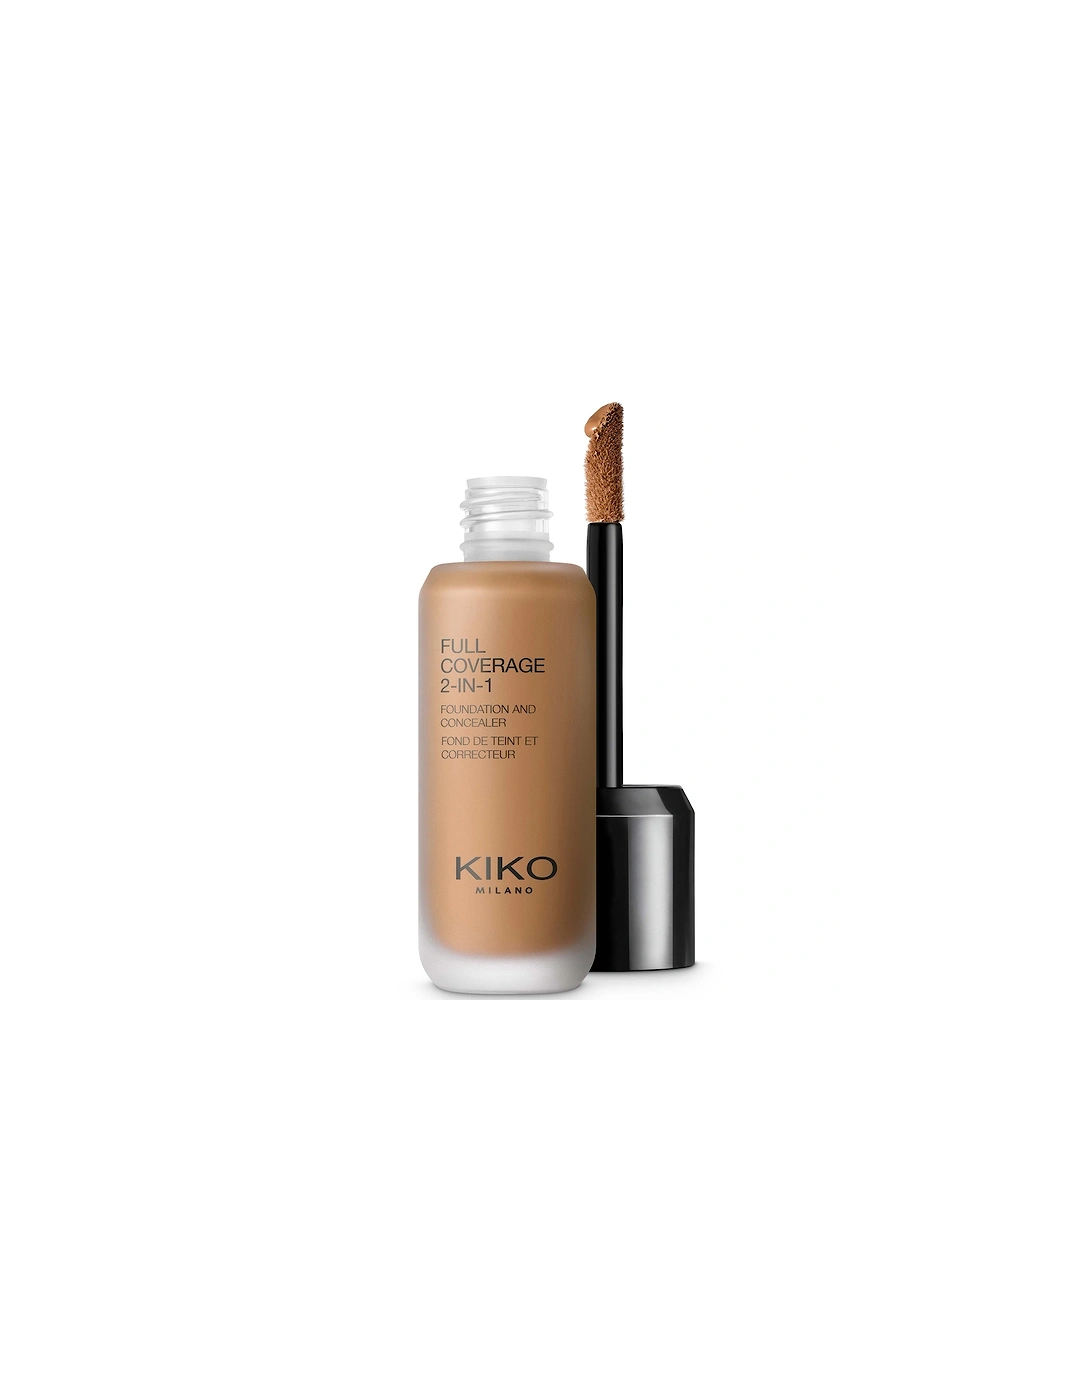 Full Coverage 2-in-1 Foundation and Concealer 25ml - 120 Warm Beige, 2 of 1